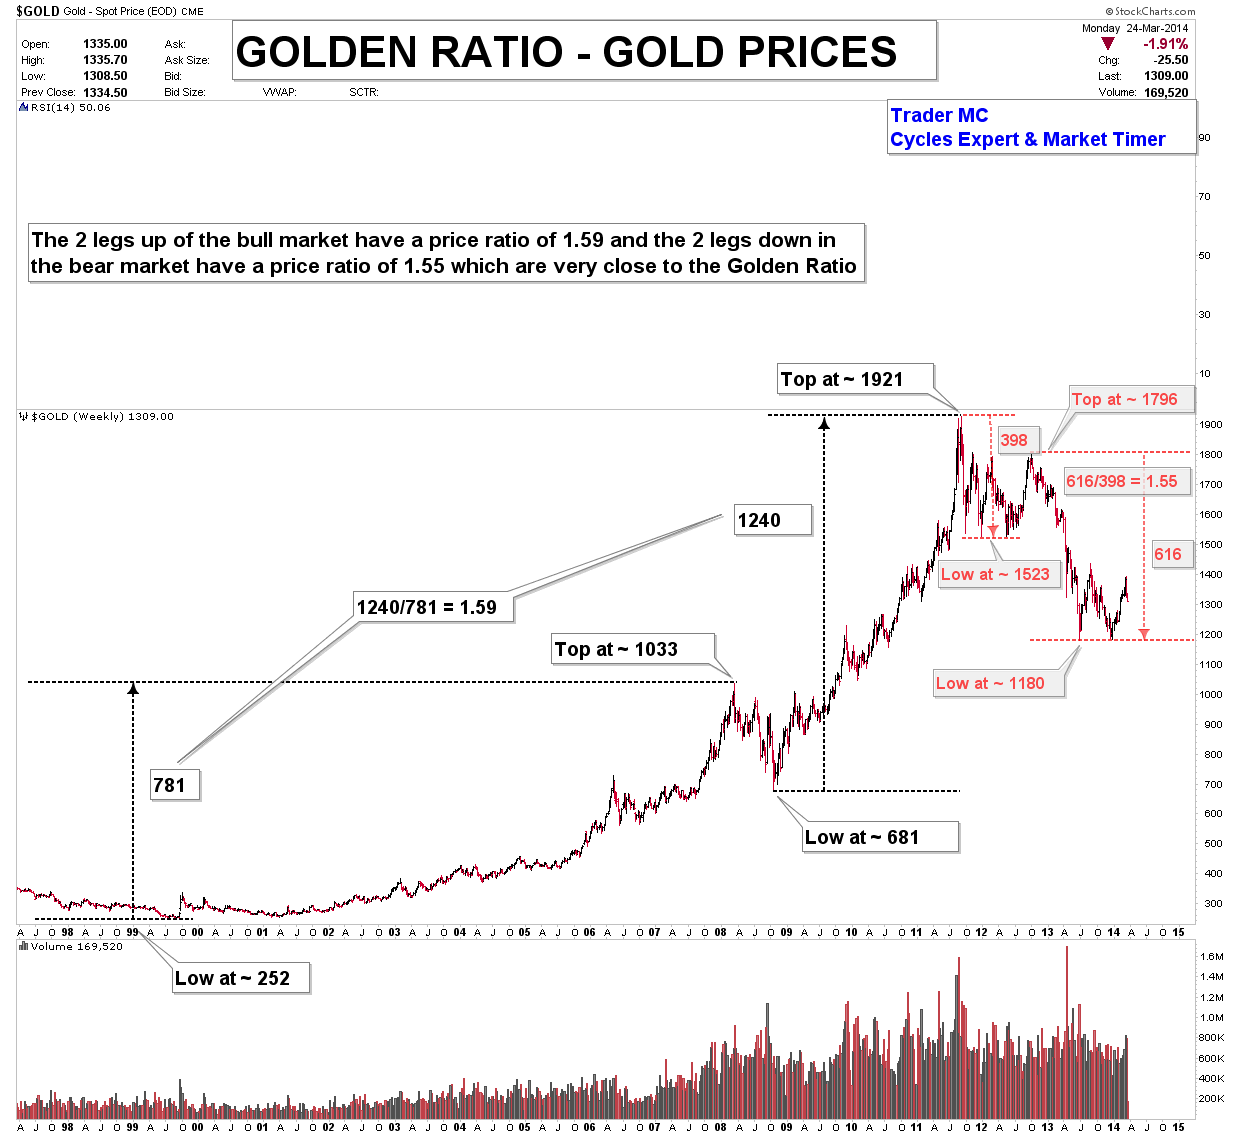 GOLDEN-RATIO-GOLD-PRICES-CHART-MAR-25